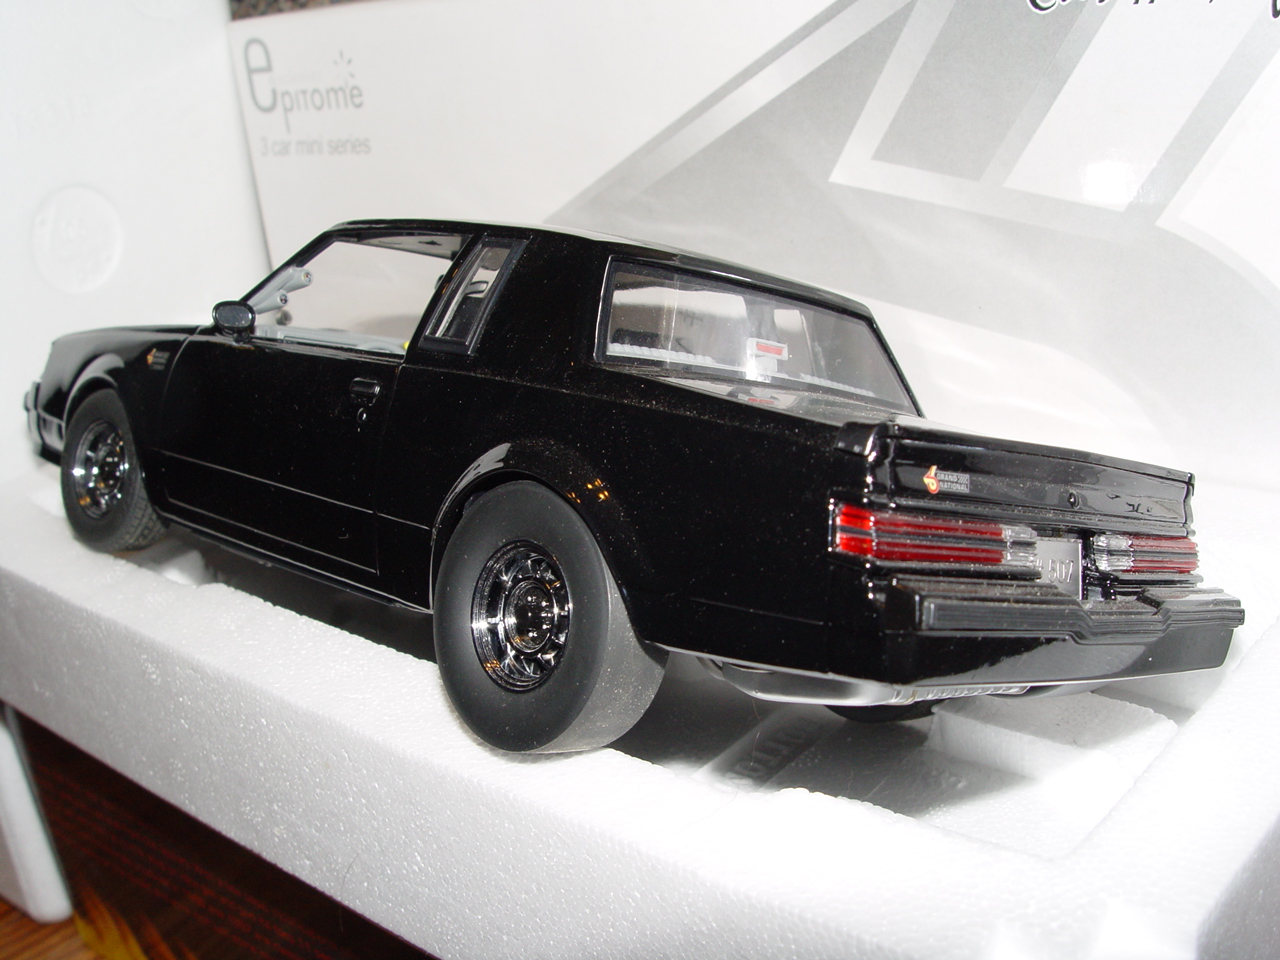 1 18 scale buick grand national